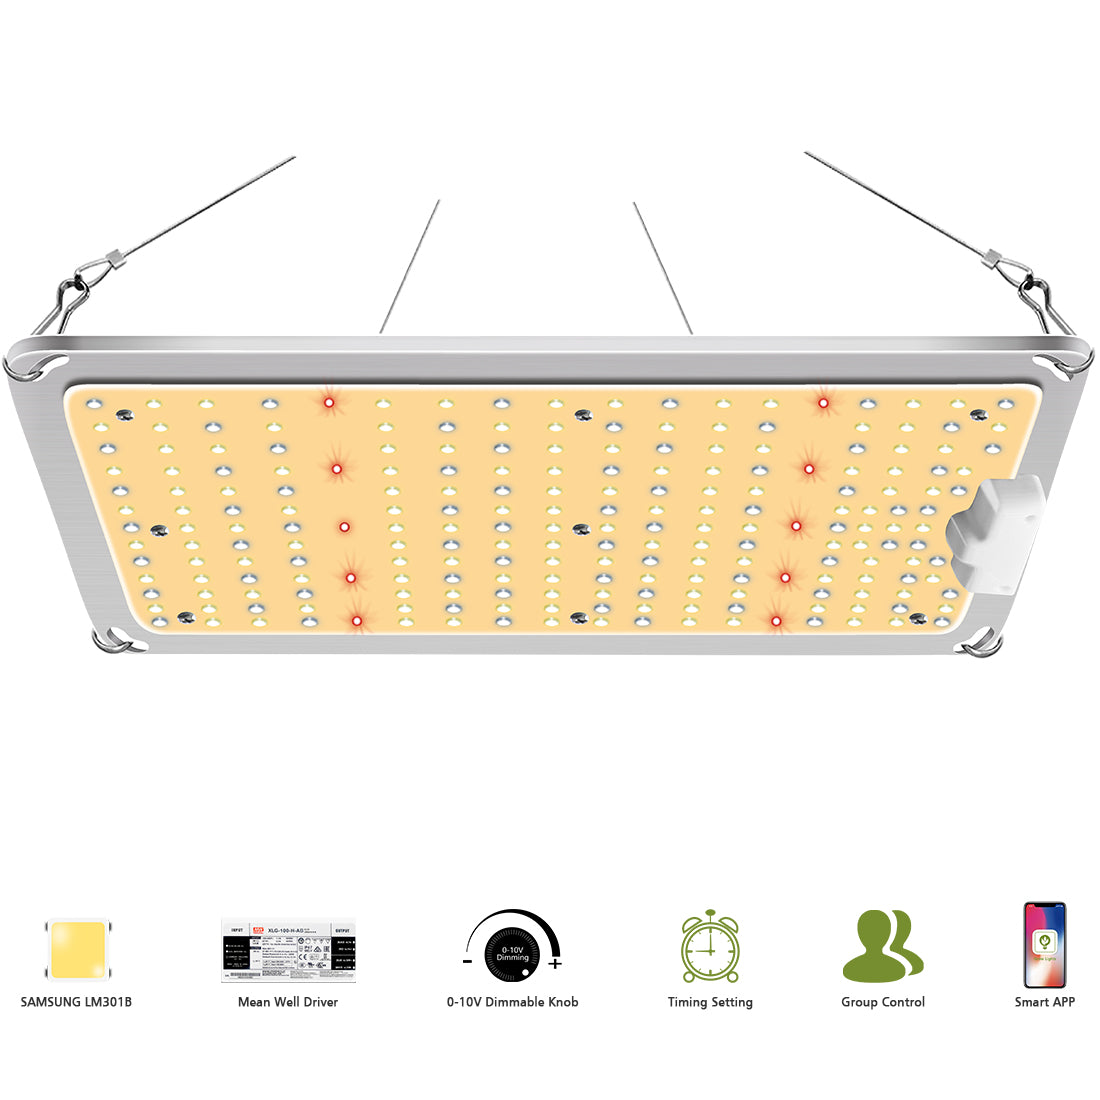 US STOCK LED Panel Grow Light GL1000a Pro with APP Control Samsung LM301b Diodes & MeanWell Driver, Sunlike Full Spectrum for Hydroponic Indoor Plants